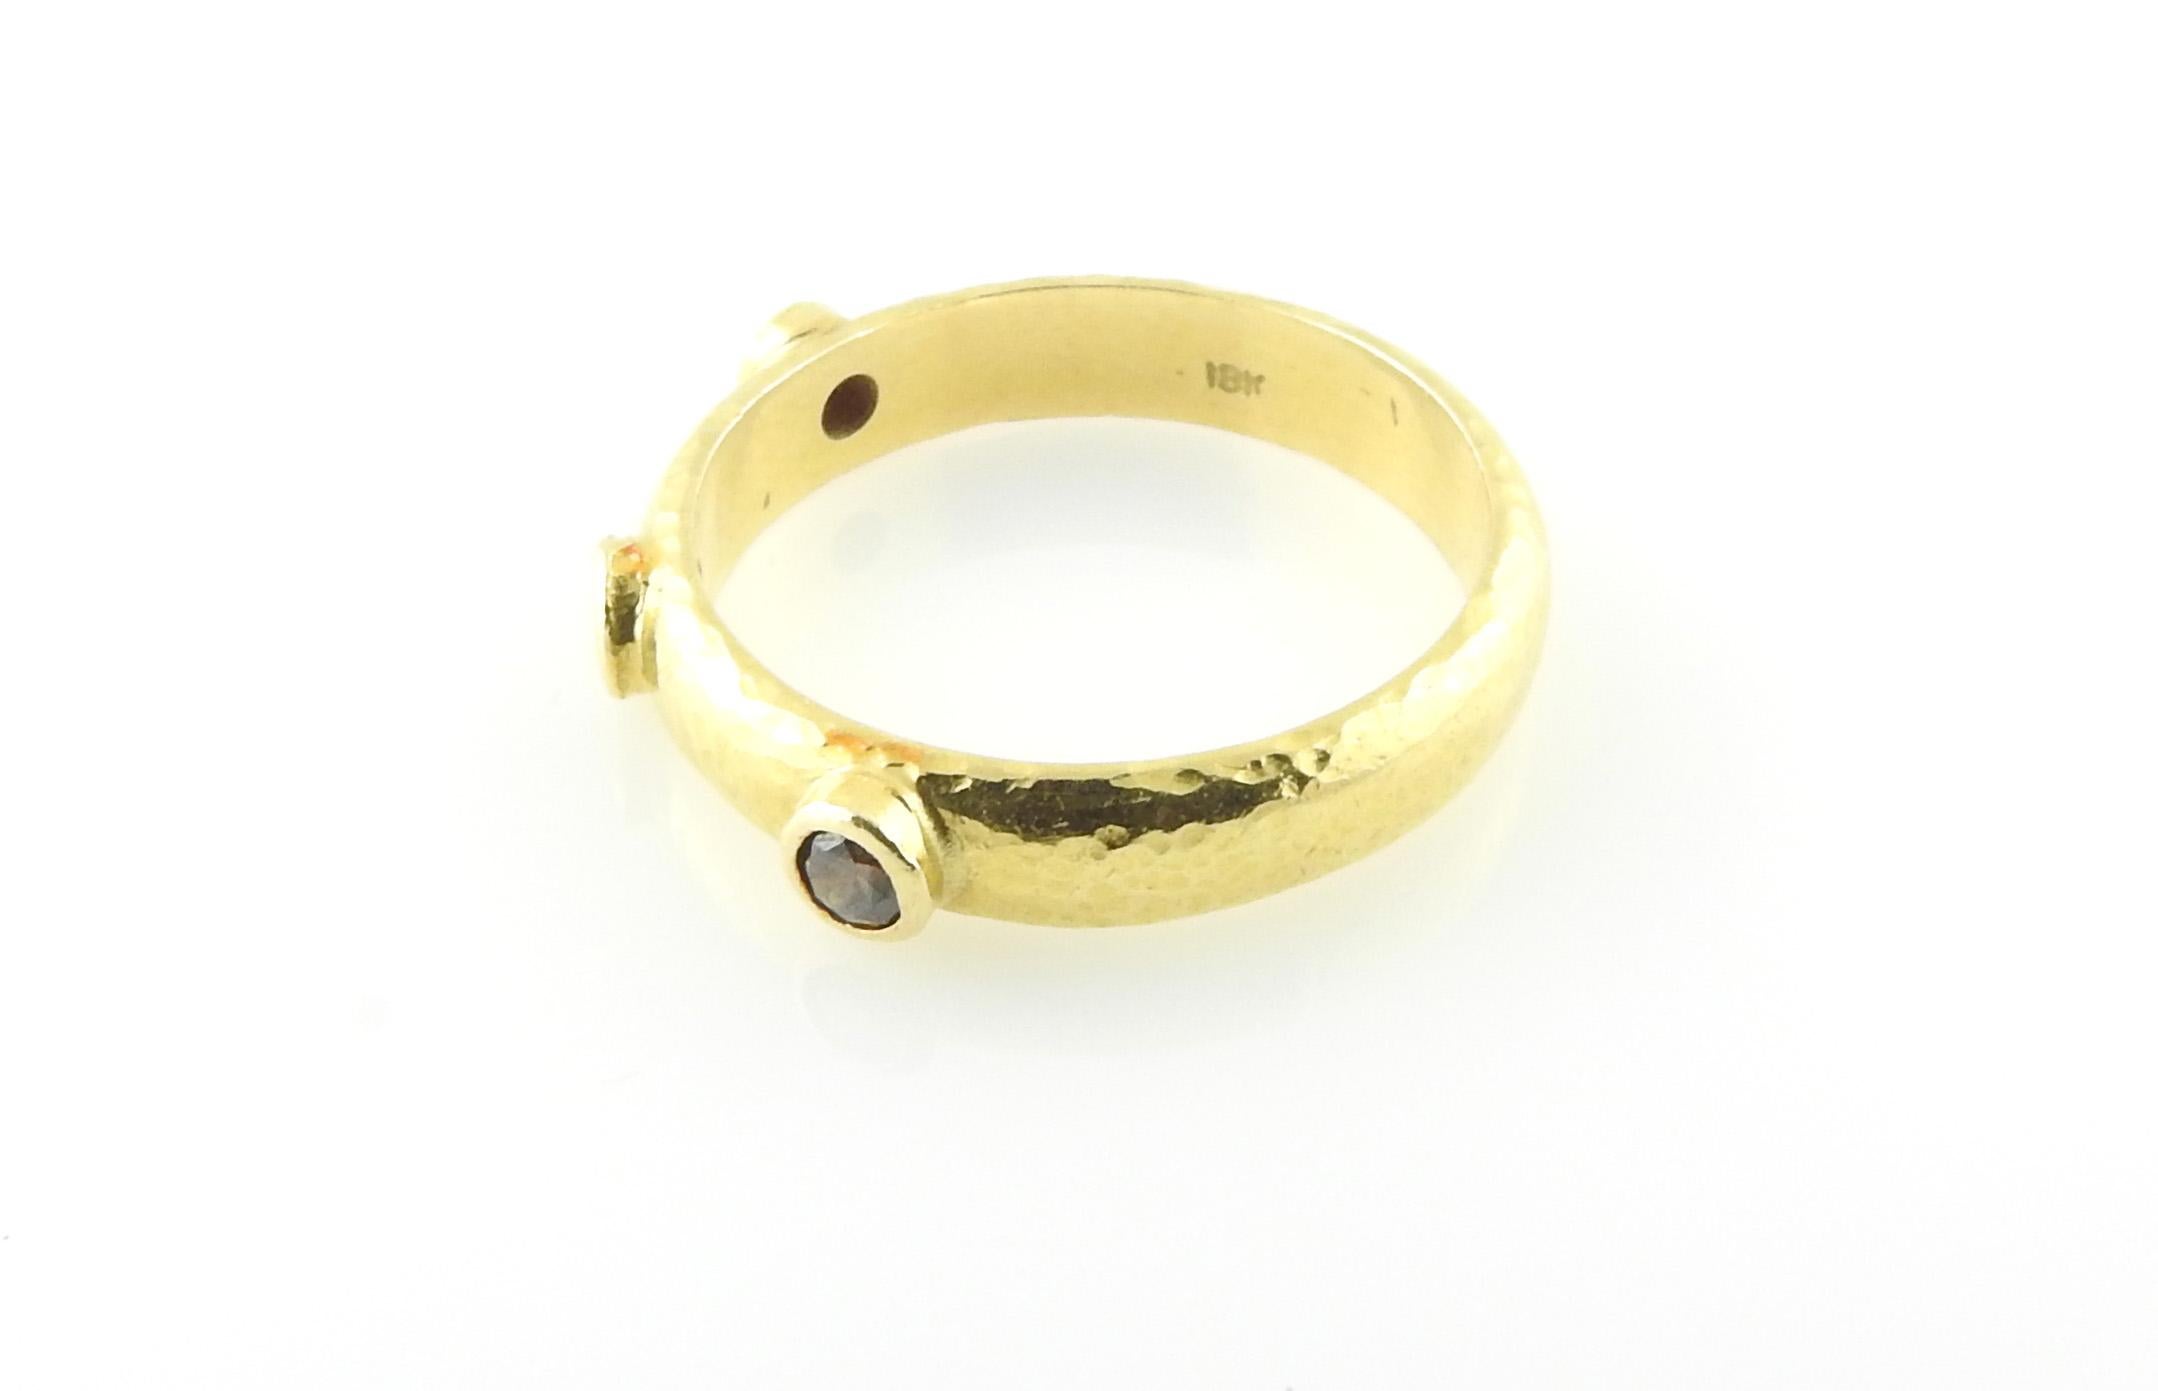 Elizabeth Locke 18K Hammered Yellow Gold Diamond Stacking Band

This Elizabeth Locke stacking band is set in hammered 18K yellow gold.

The band is approx. 4mm wide and 1.5mm thick

3 bezel set brown diamonds are set in the front of the ring.

Size